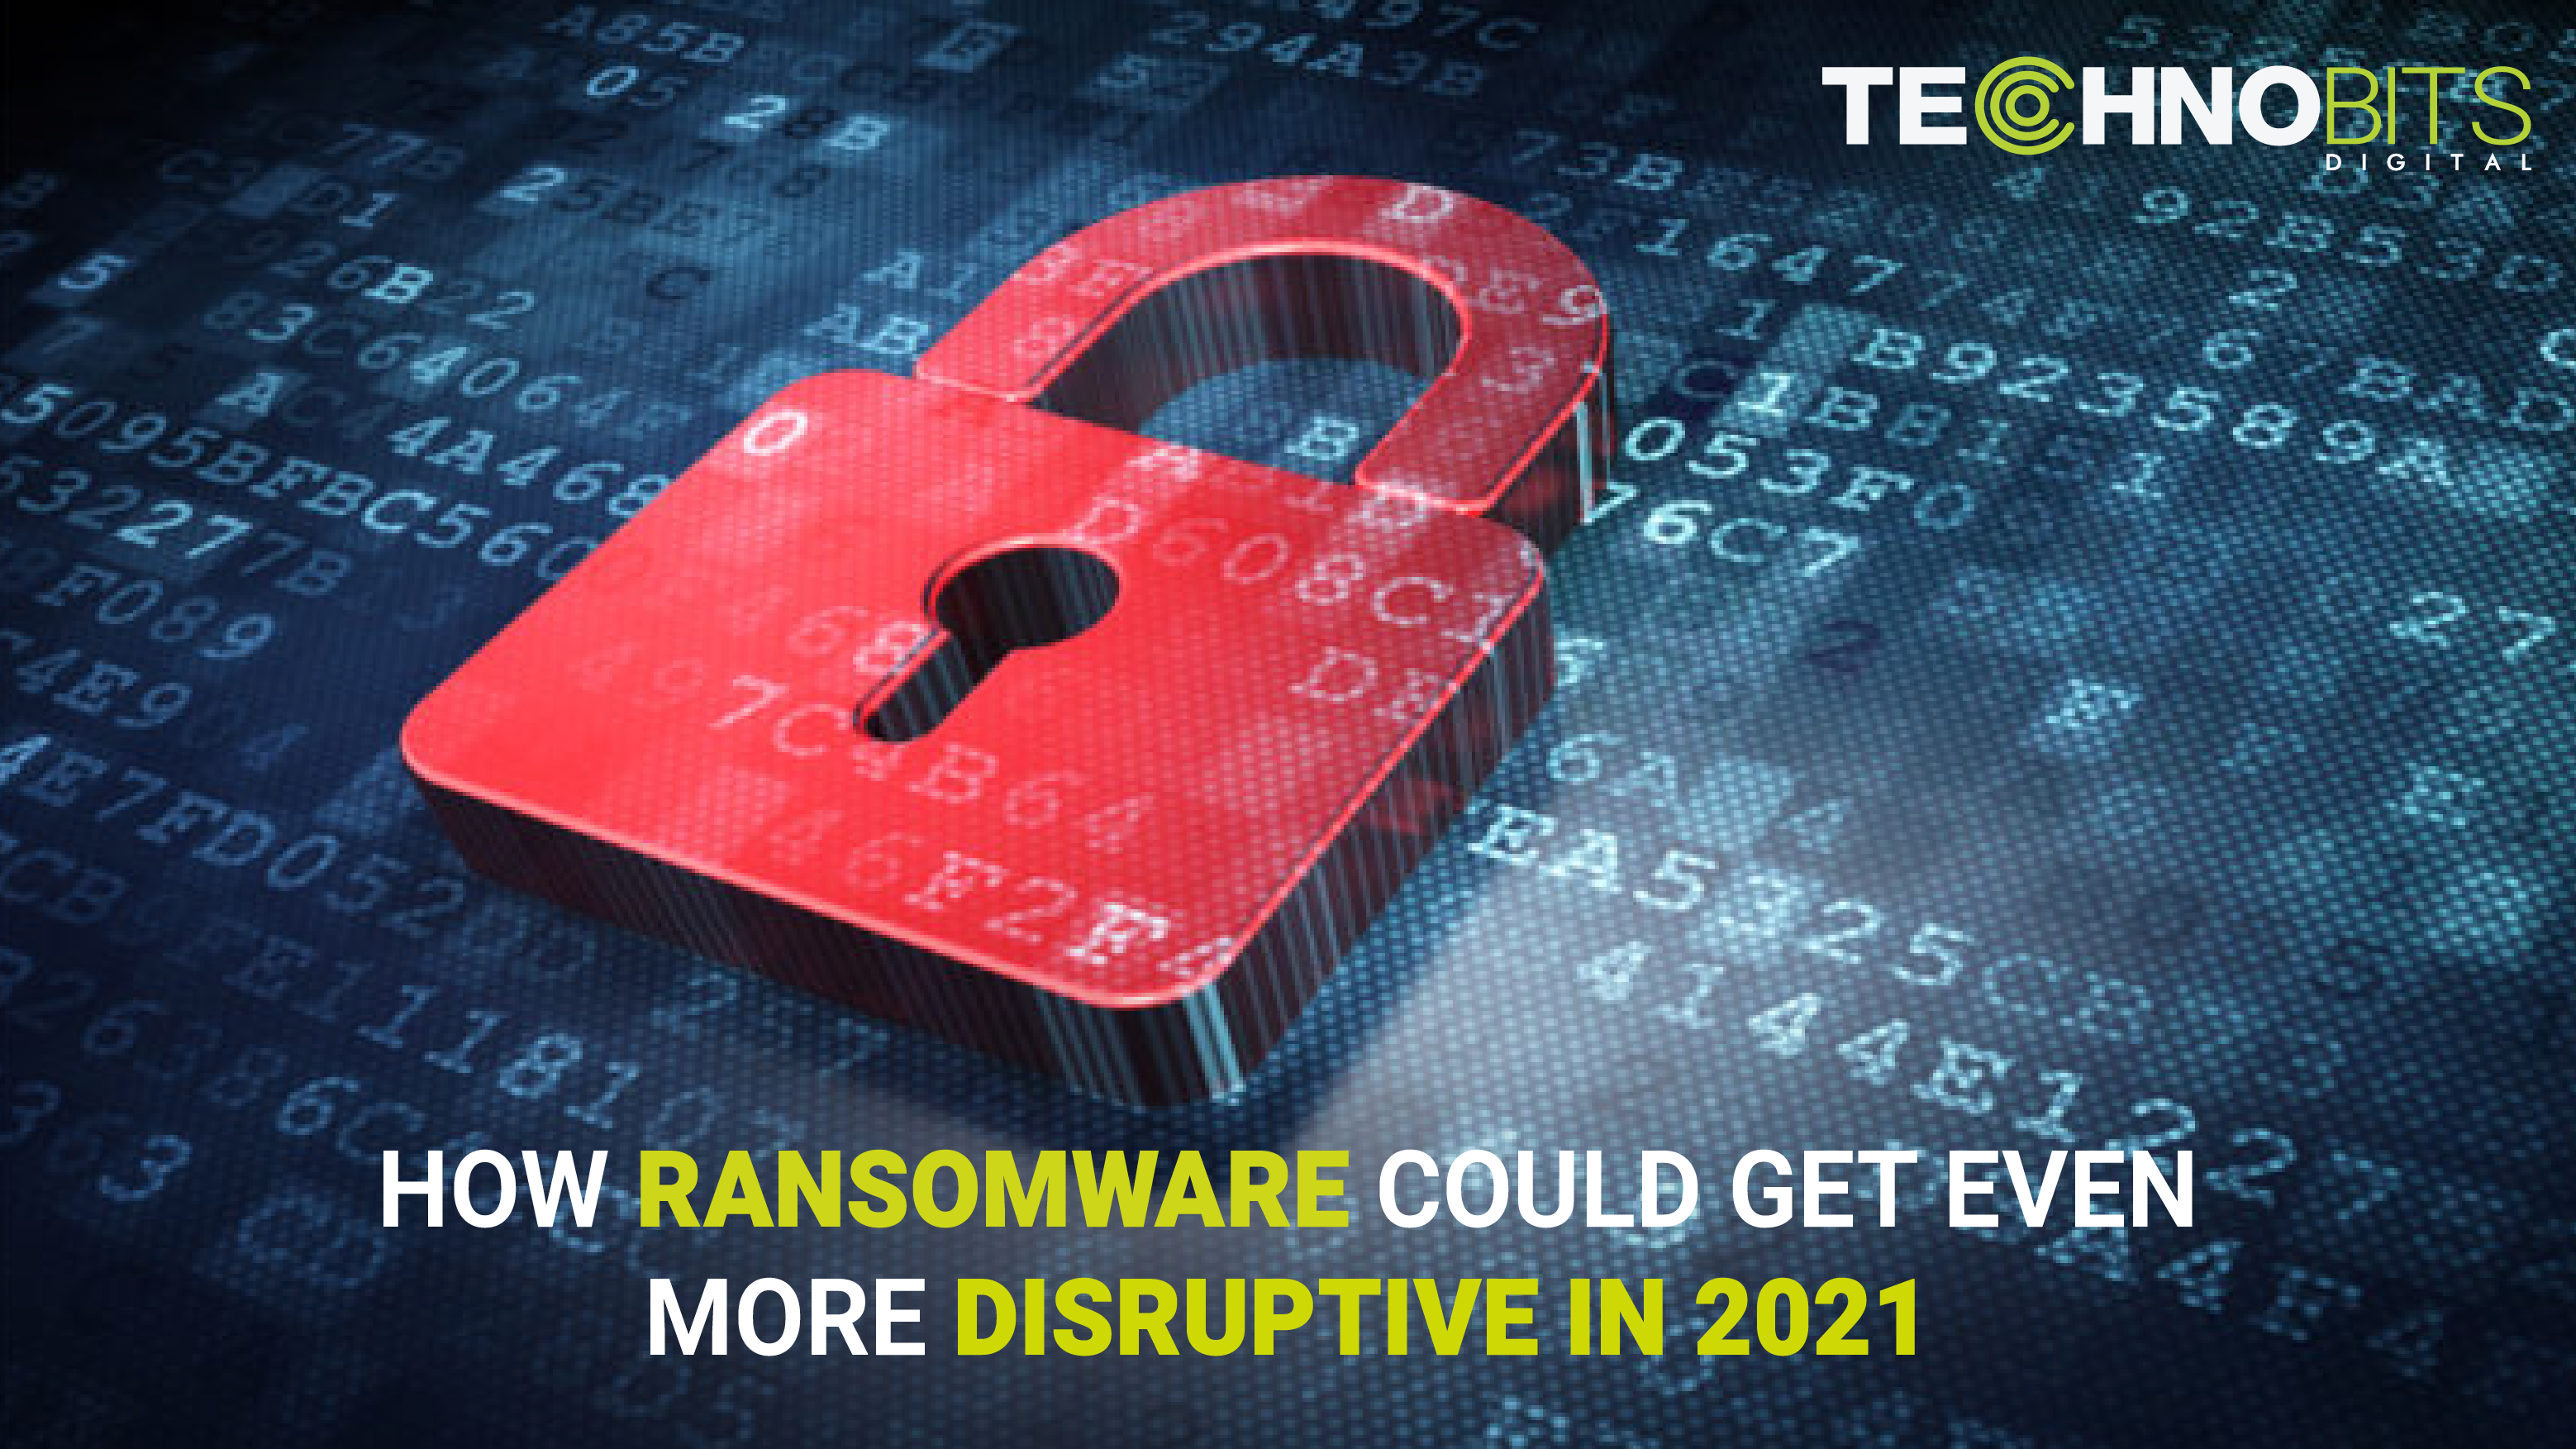 Ransomware could get disruptive.